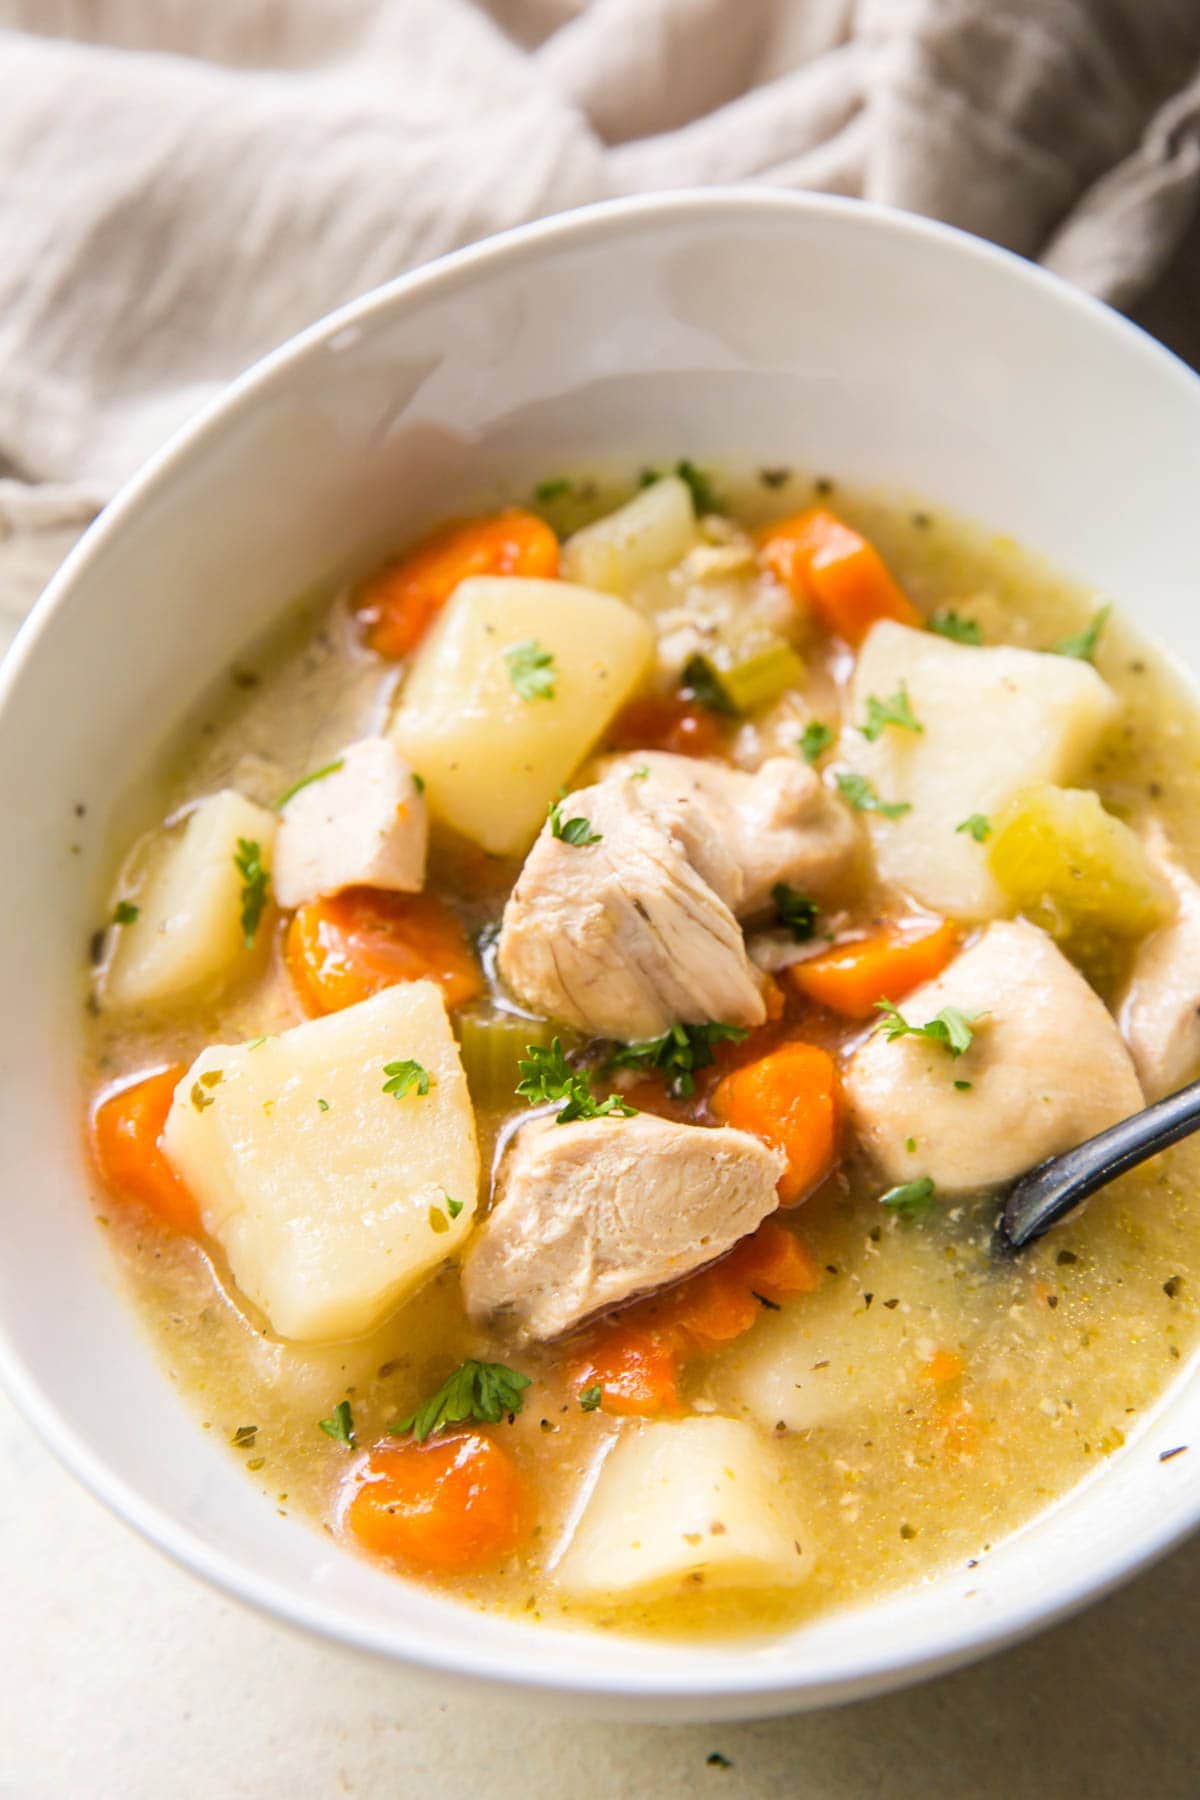 Seriously! 49+ Reasons for Easy Chicken Stew! This chicken stew takes under an hour, but it